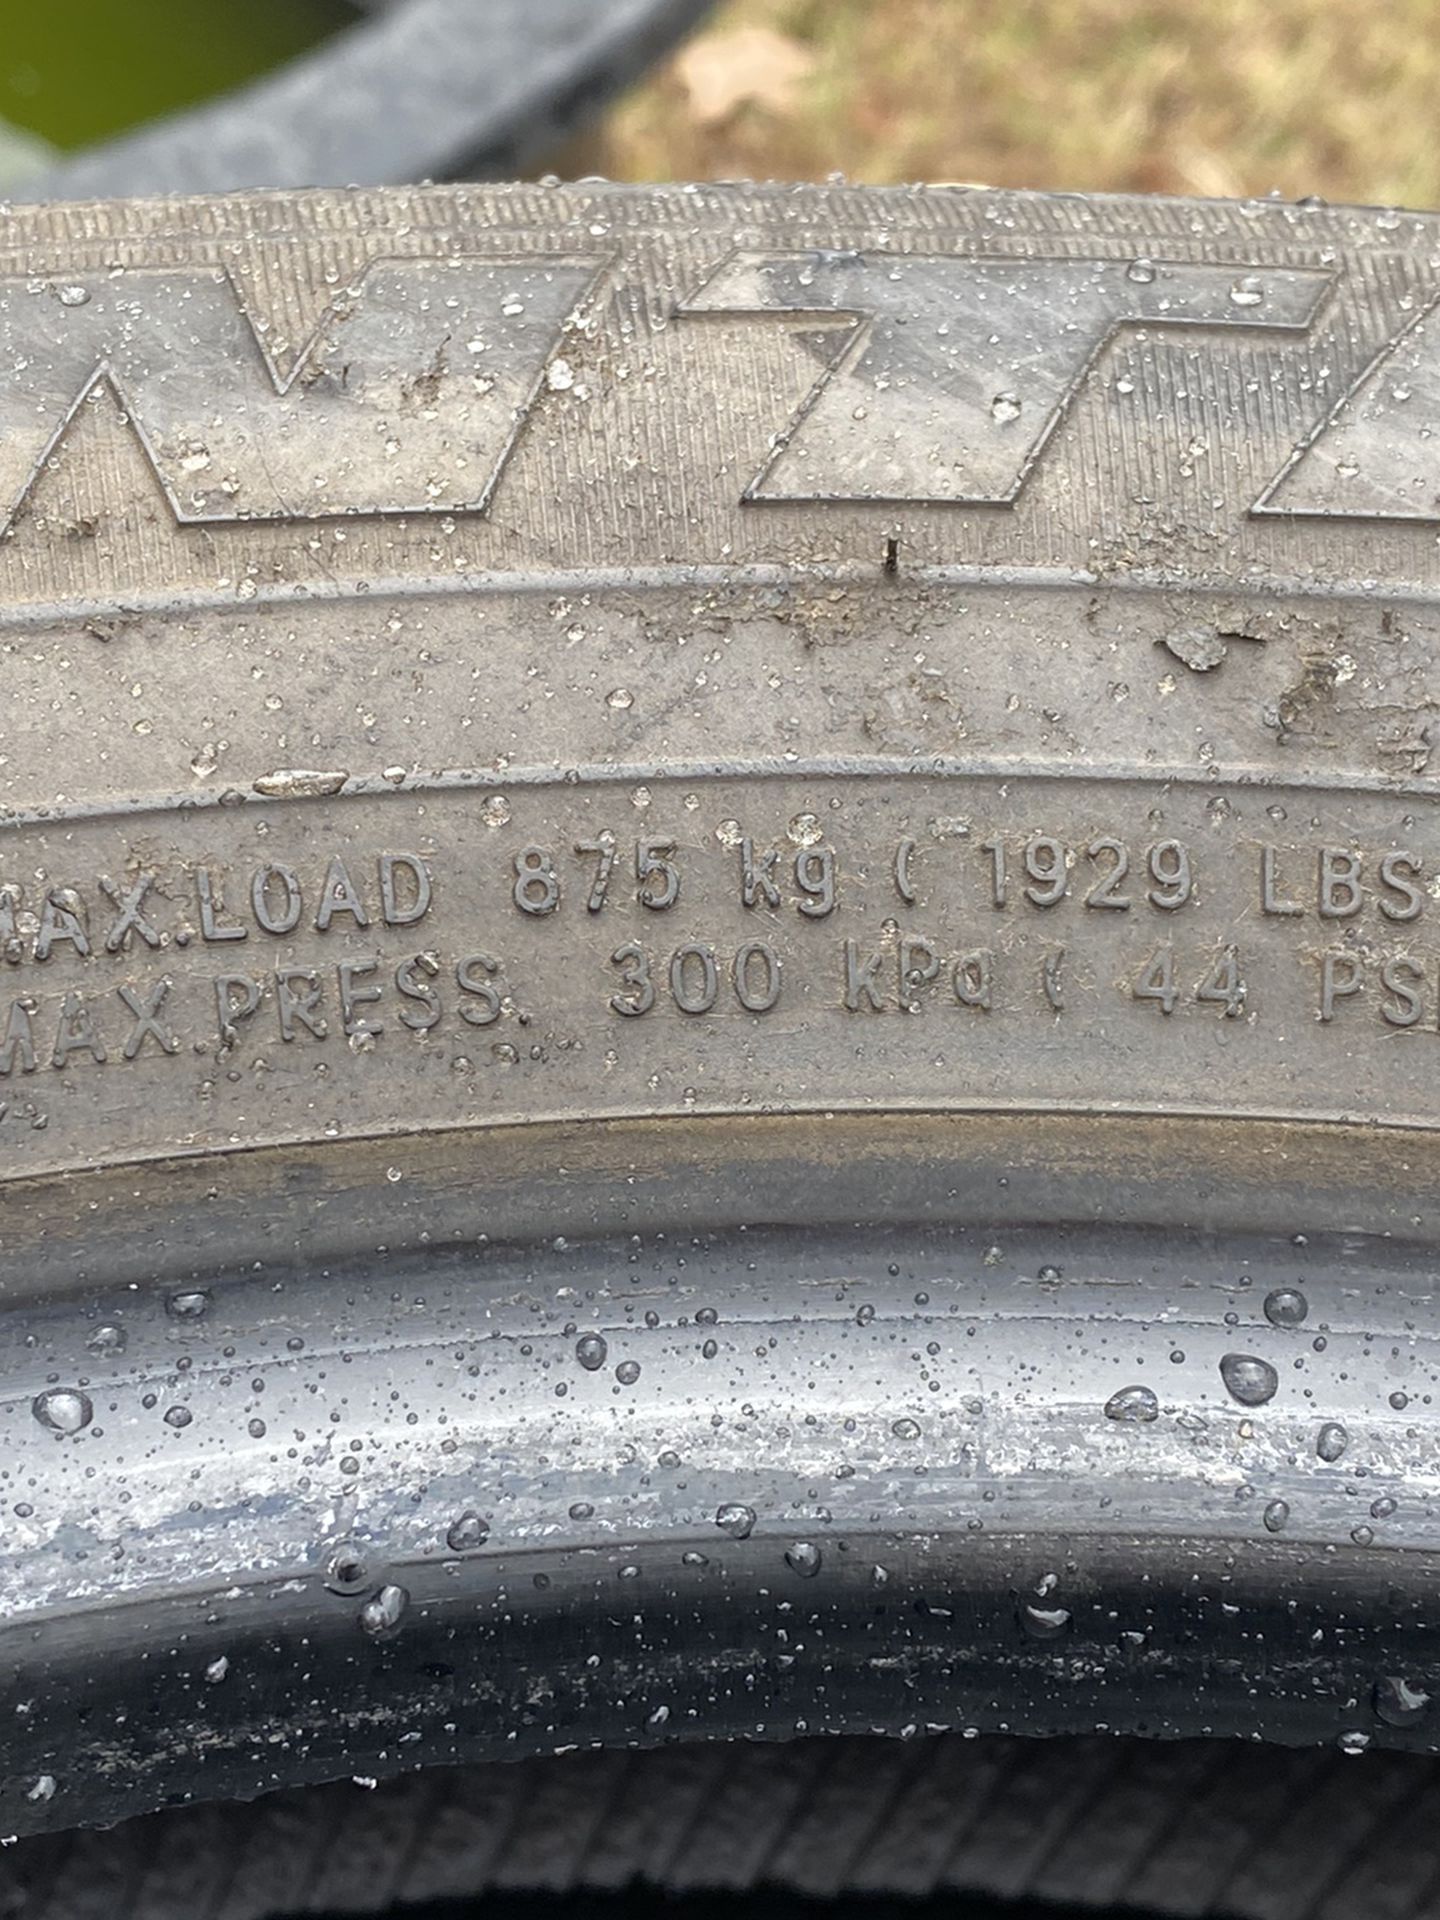 Tires 245/55R19 Used Tires 19” SUV Good